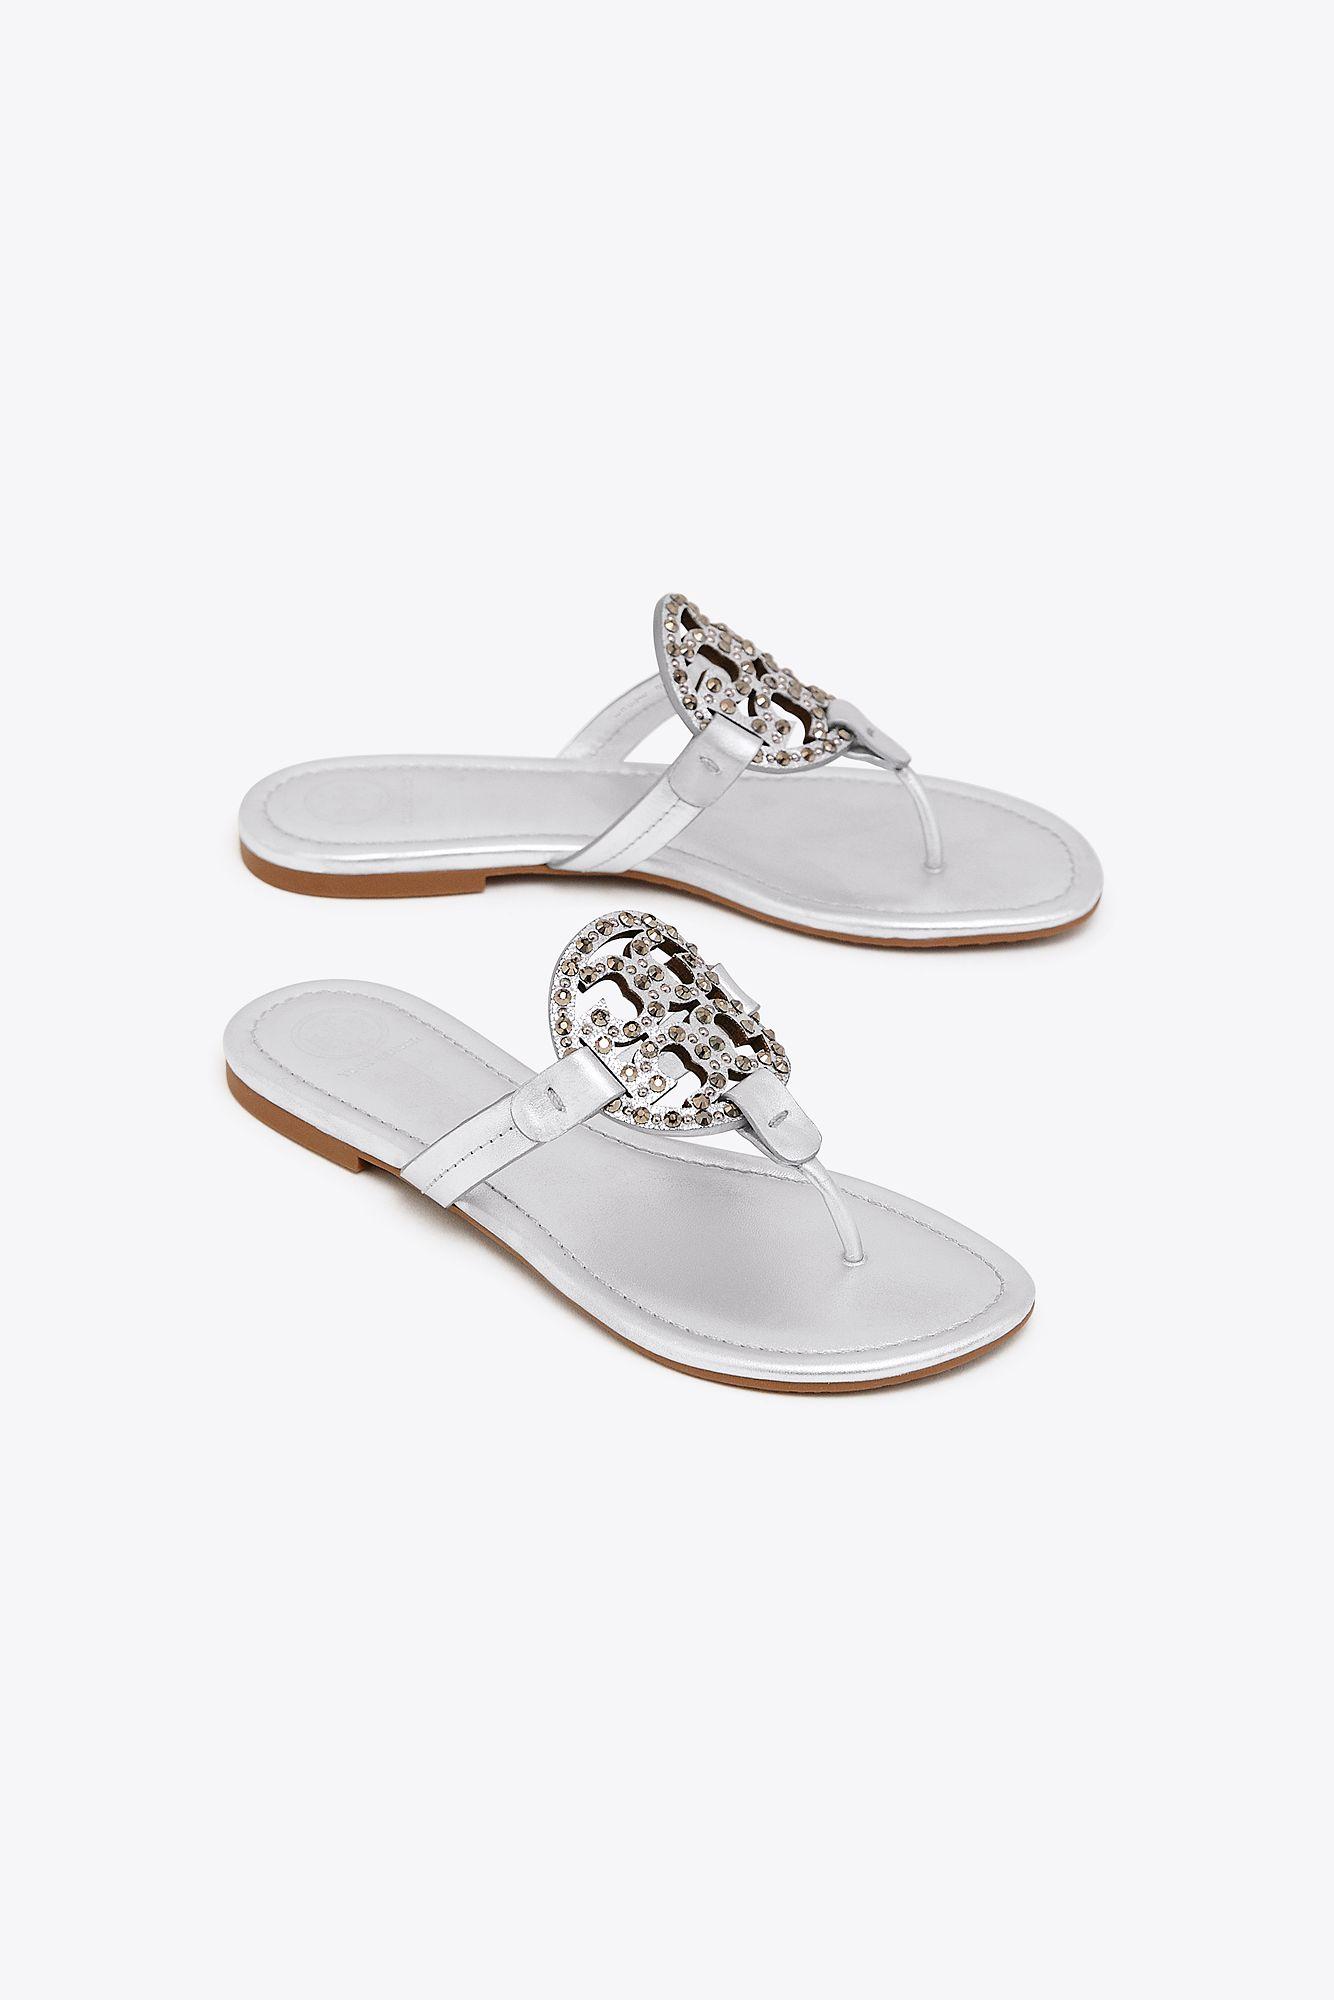 Tory Burch Miller Embellished Sandals, Metallic Leather - Lyst